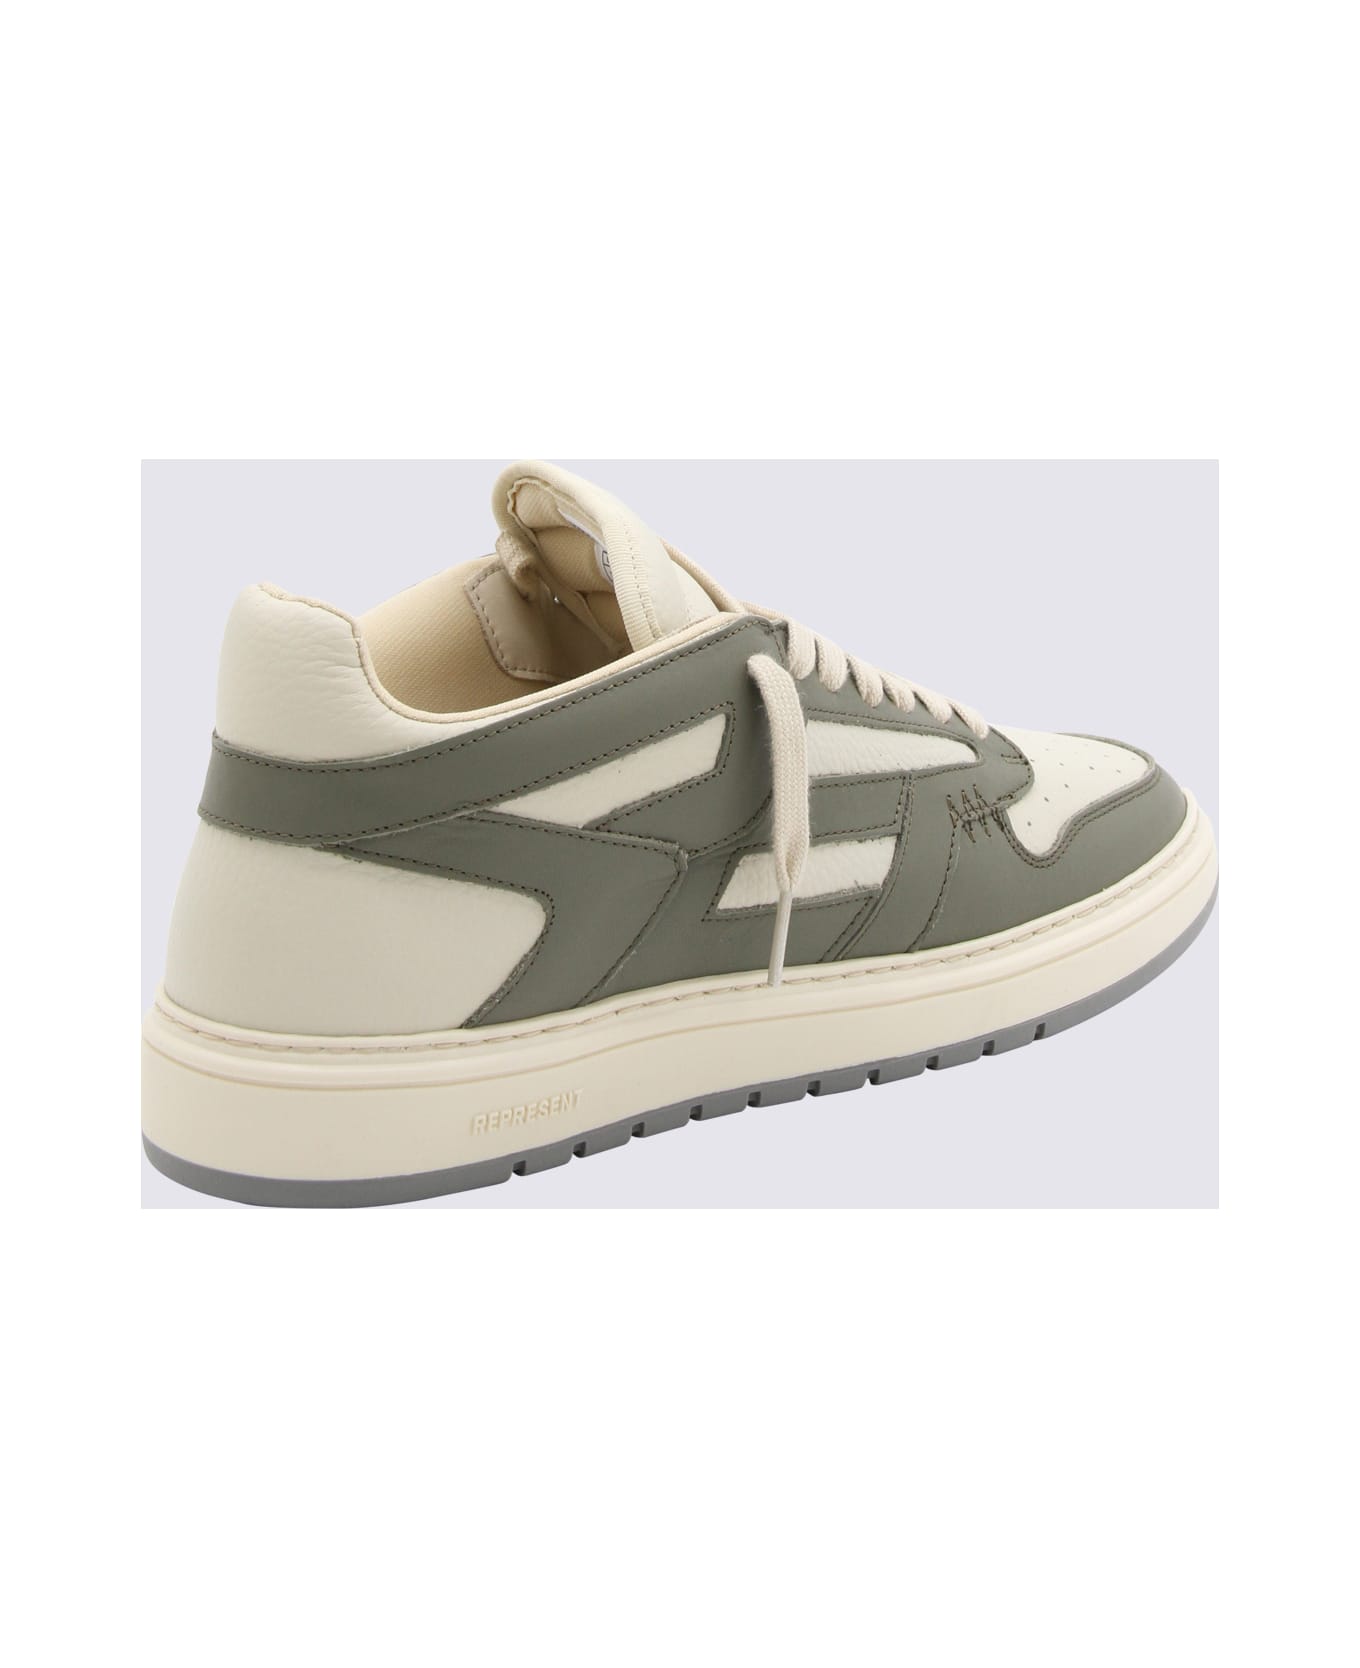 REPRESENT White And Grey Leather Reptor Low Vintage Sneakers - White